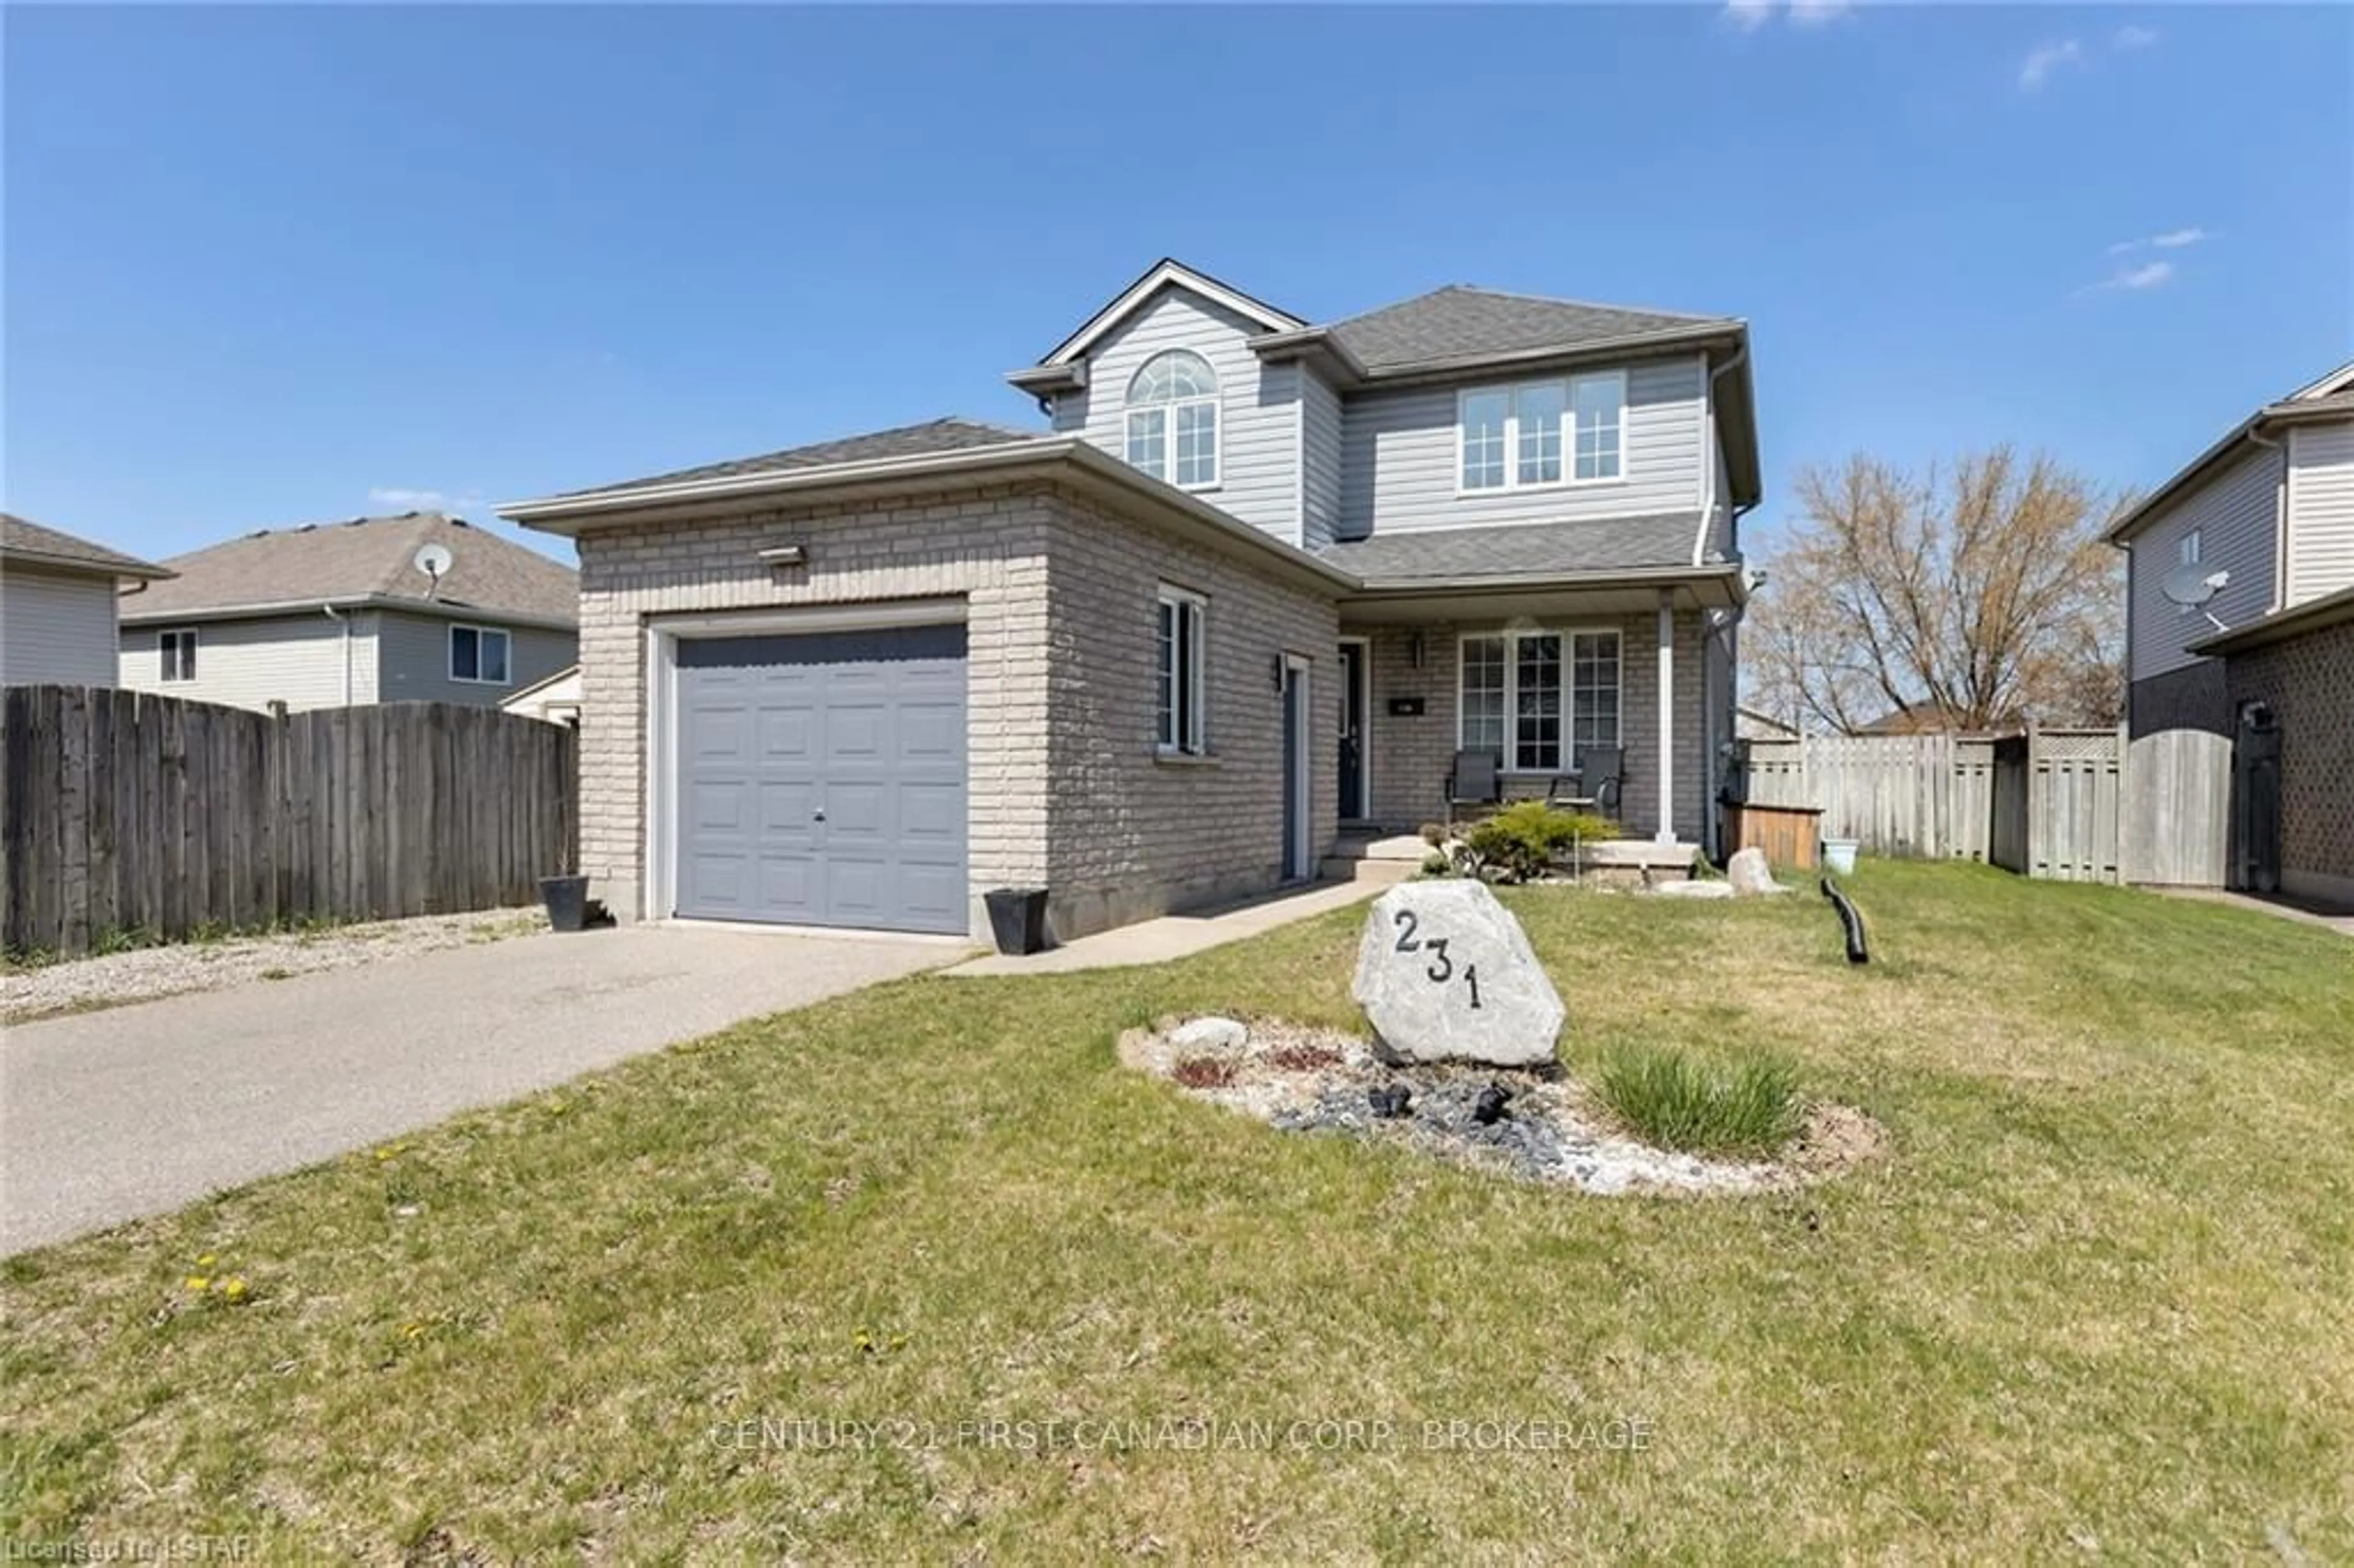 Frontside or backside of a home for 231 Parkview Dr, Strathroy-Caradoc Ontario N7G 4C1